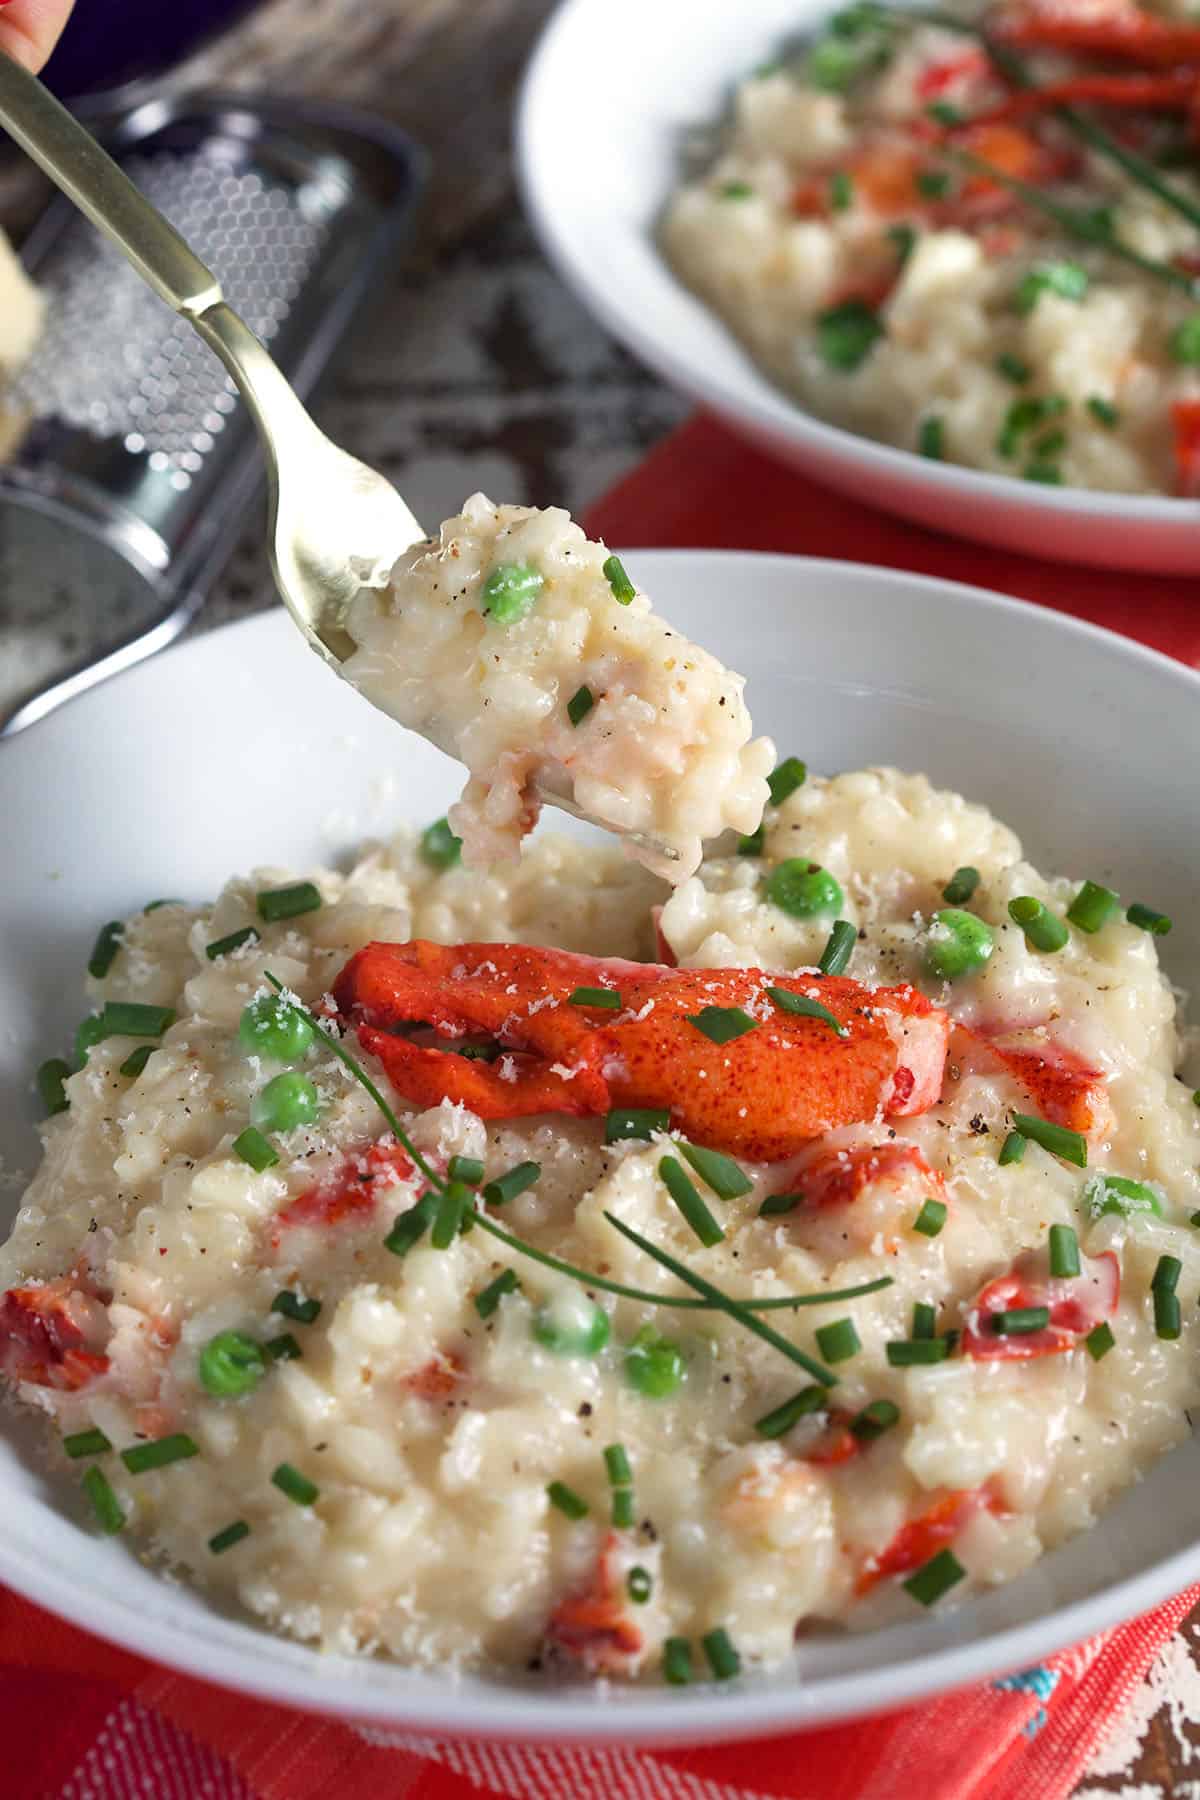 A fork is lifting a bite of lobster risotto from the bowl.